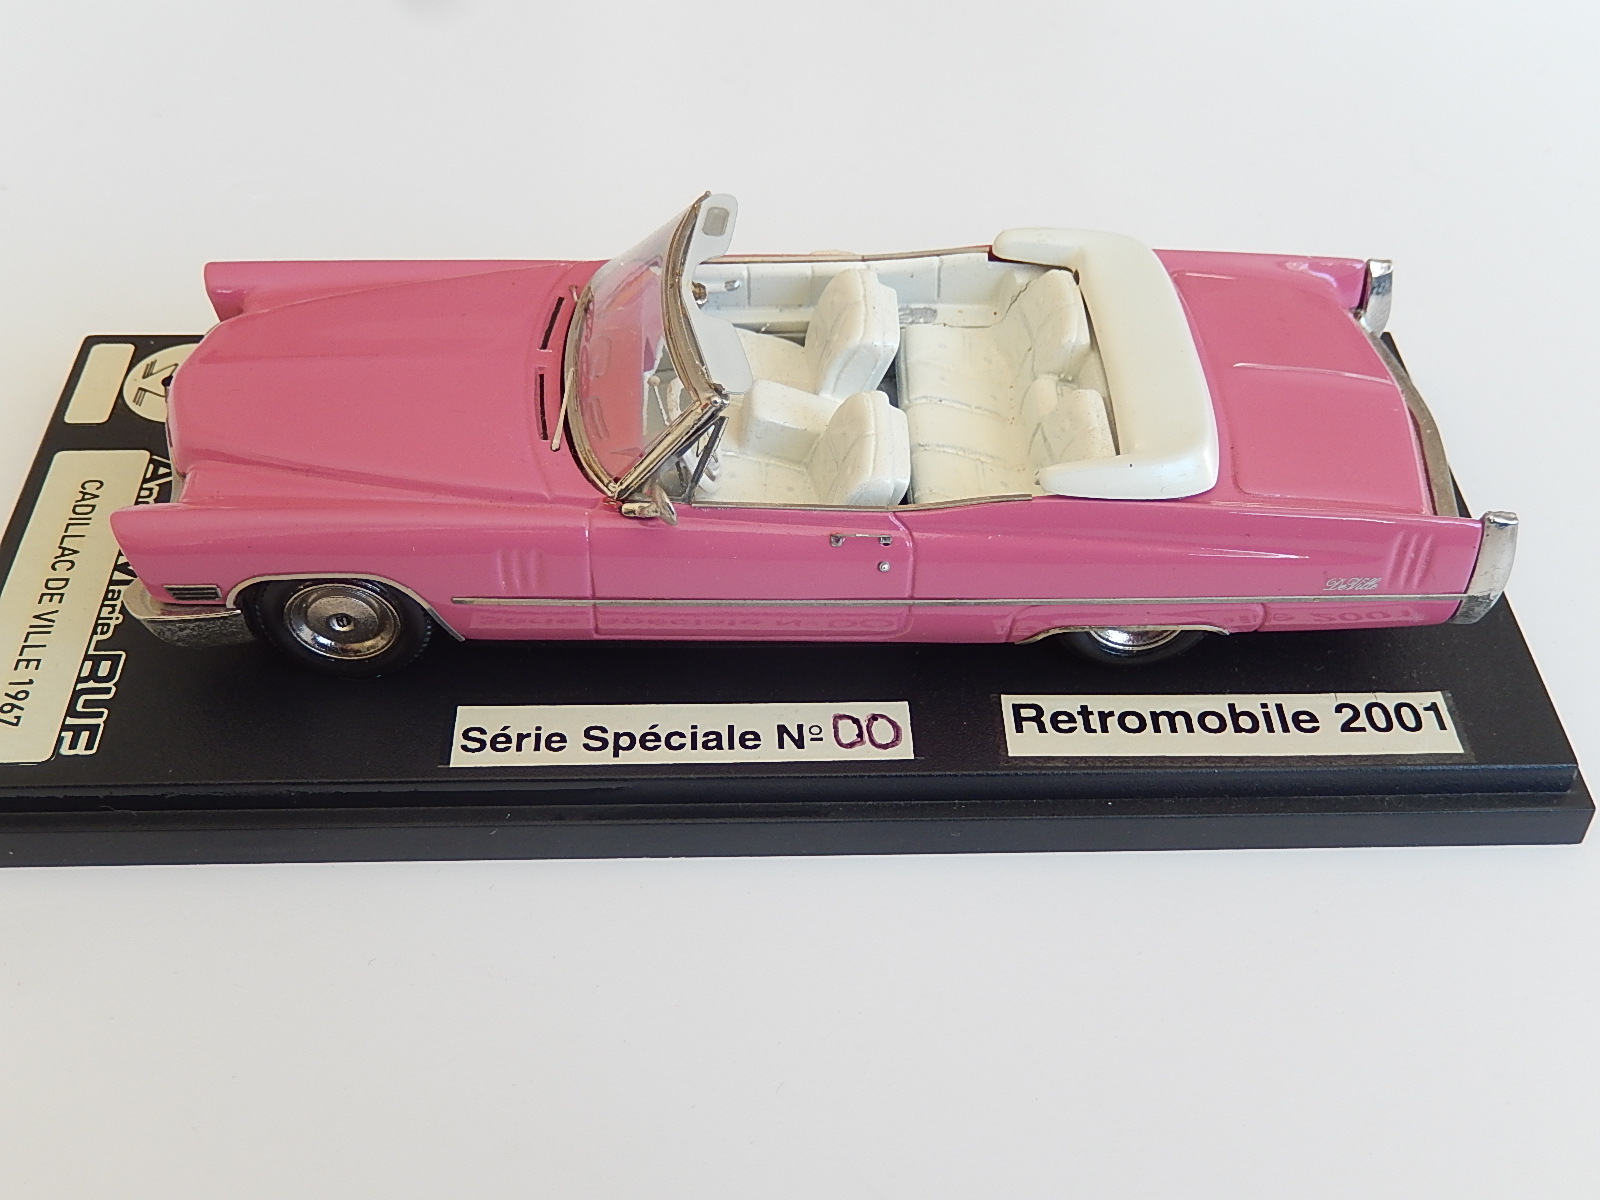 AM Ruf : Cadillac Deville, model of André Marie Ruf -> SOLD